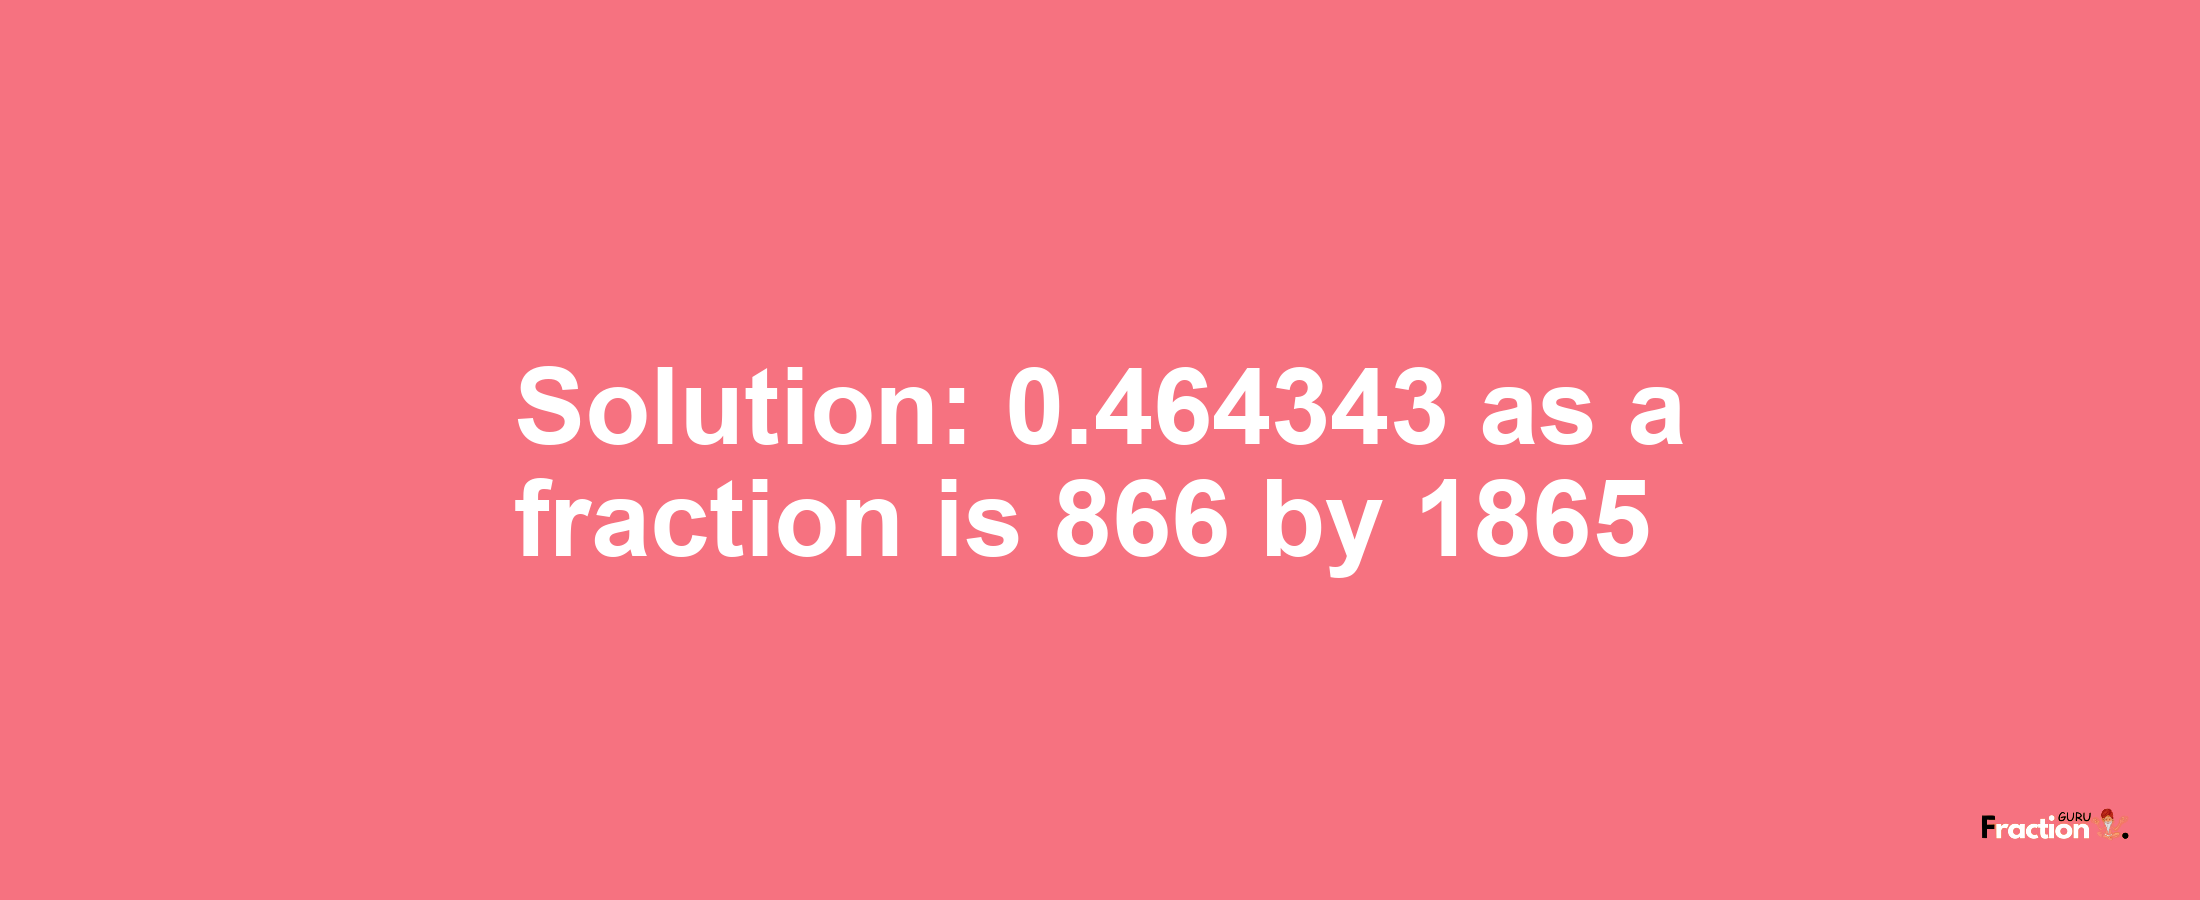 Solution:0.464343 as a fraction is 866/1865